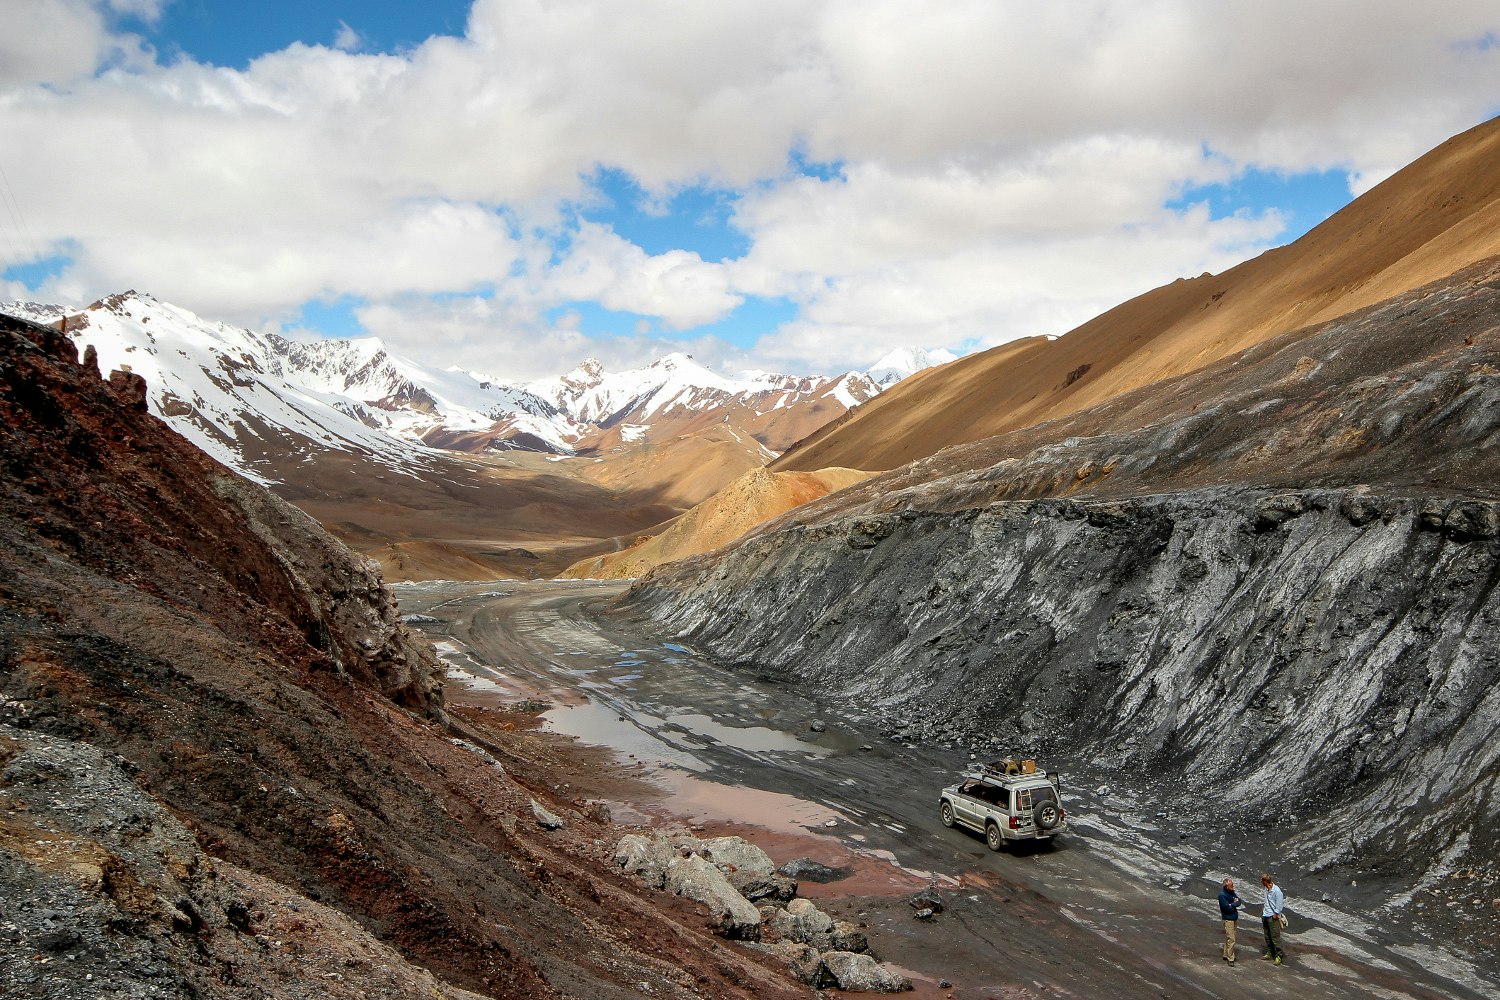 Epic Central Asia road trip: traversing the Pamir Highway. Image by Stephen Lioy / Lonely Planet